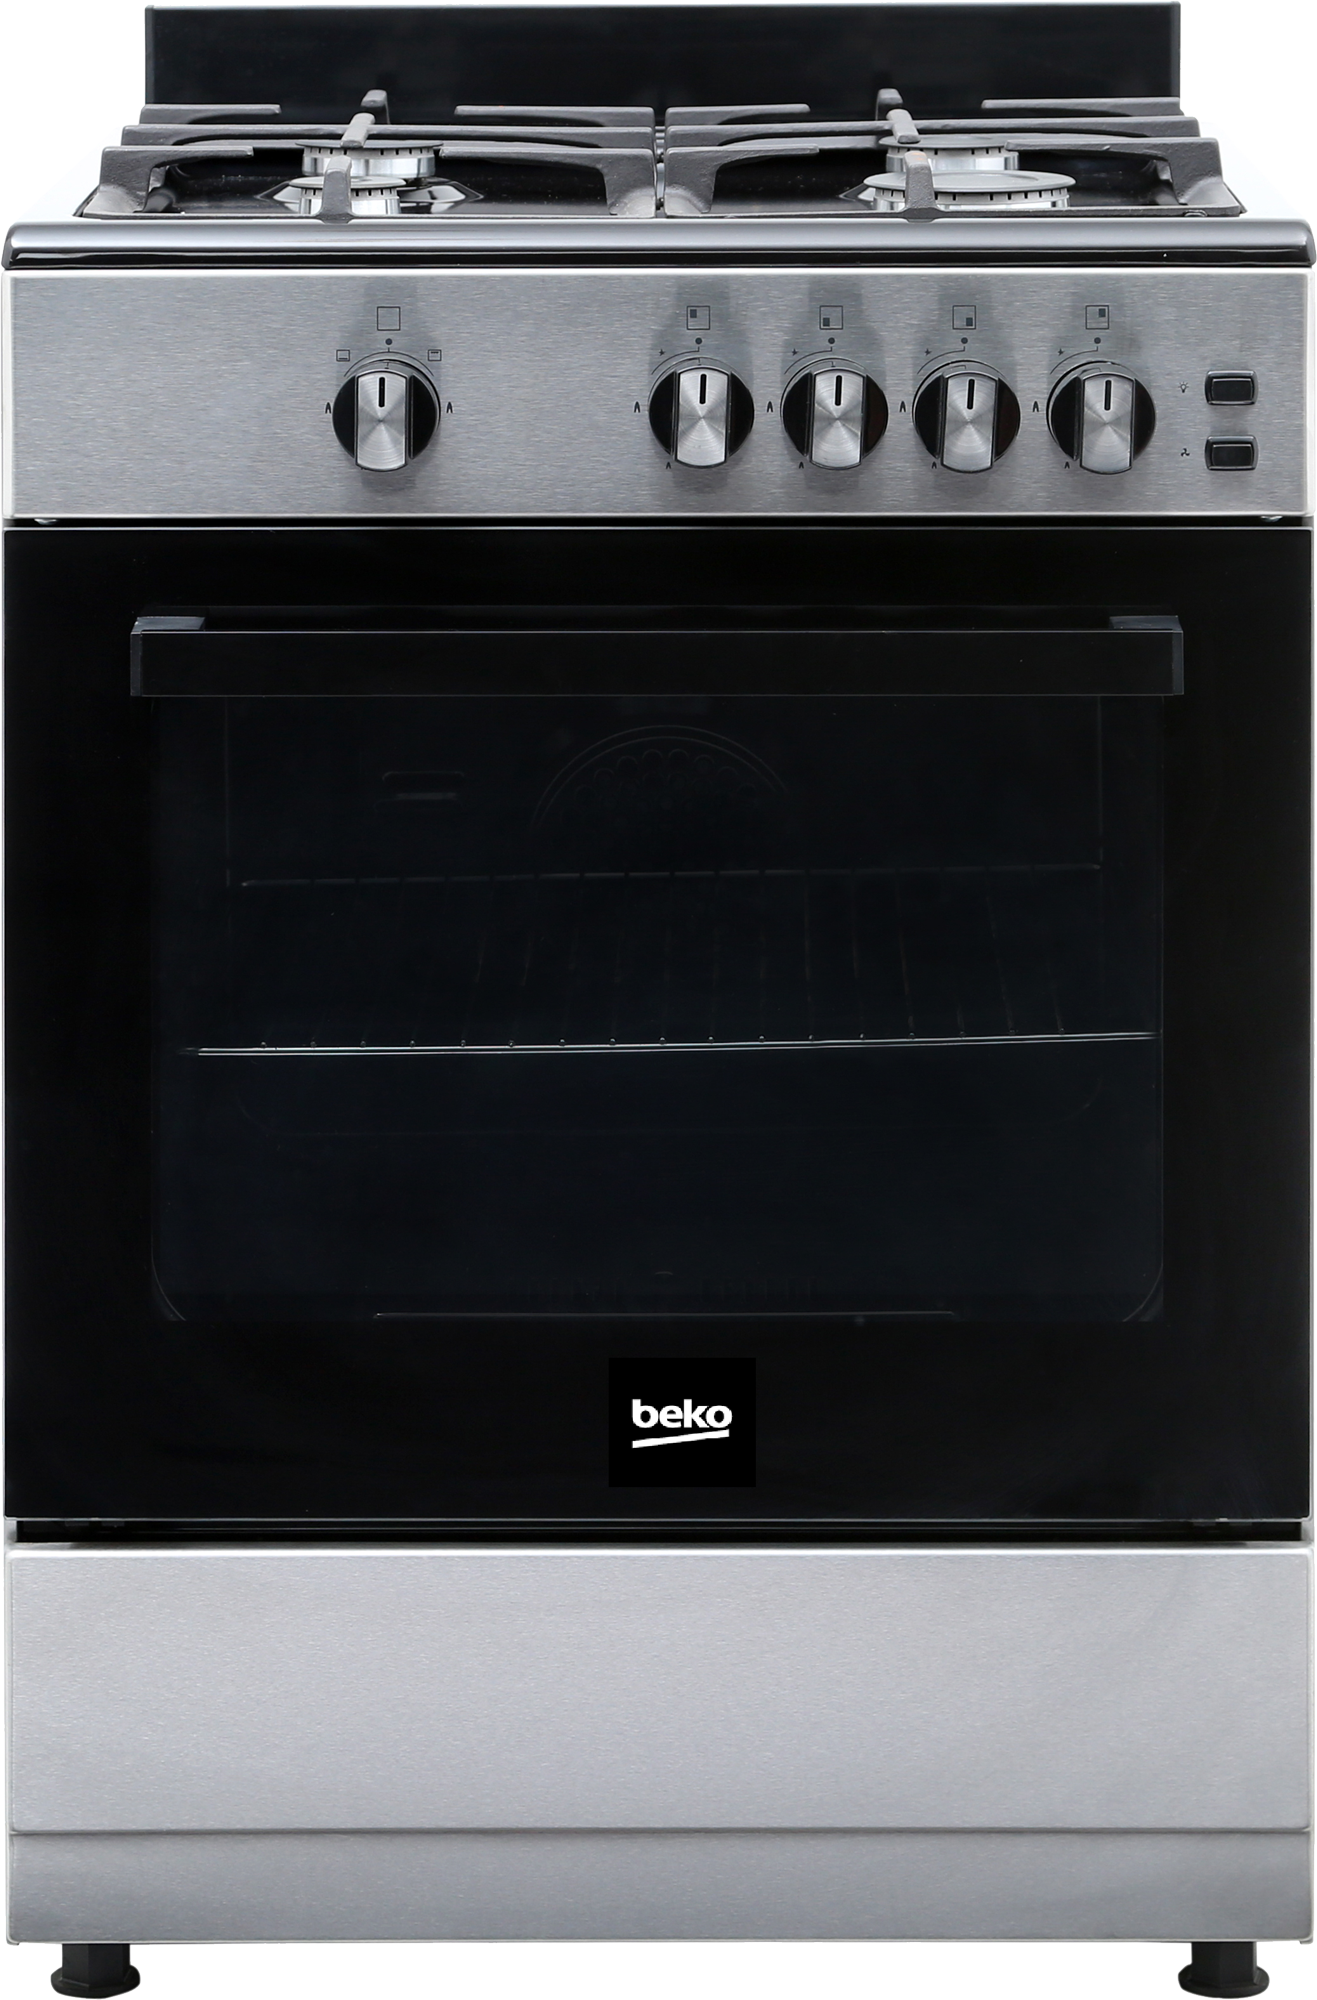 BEKO STANDING GAS COOKER BGS601-NG